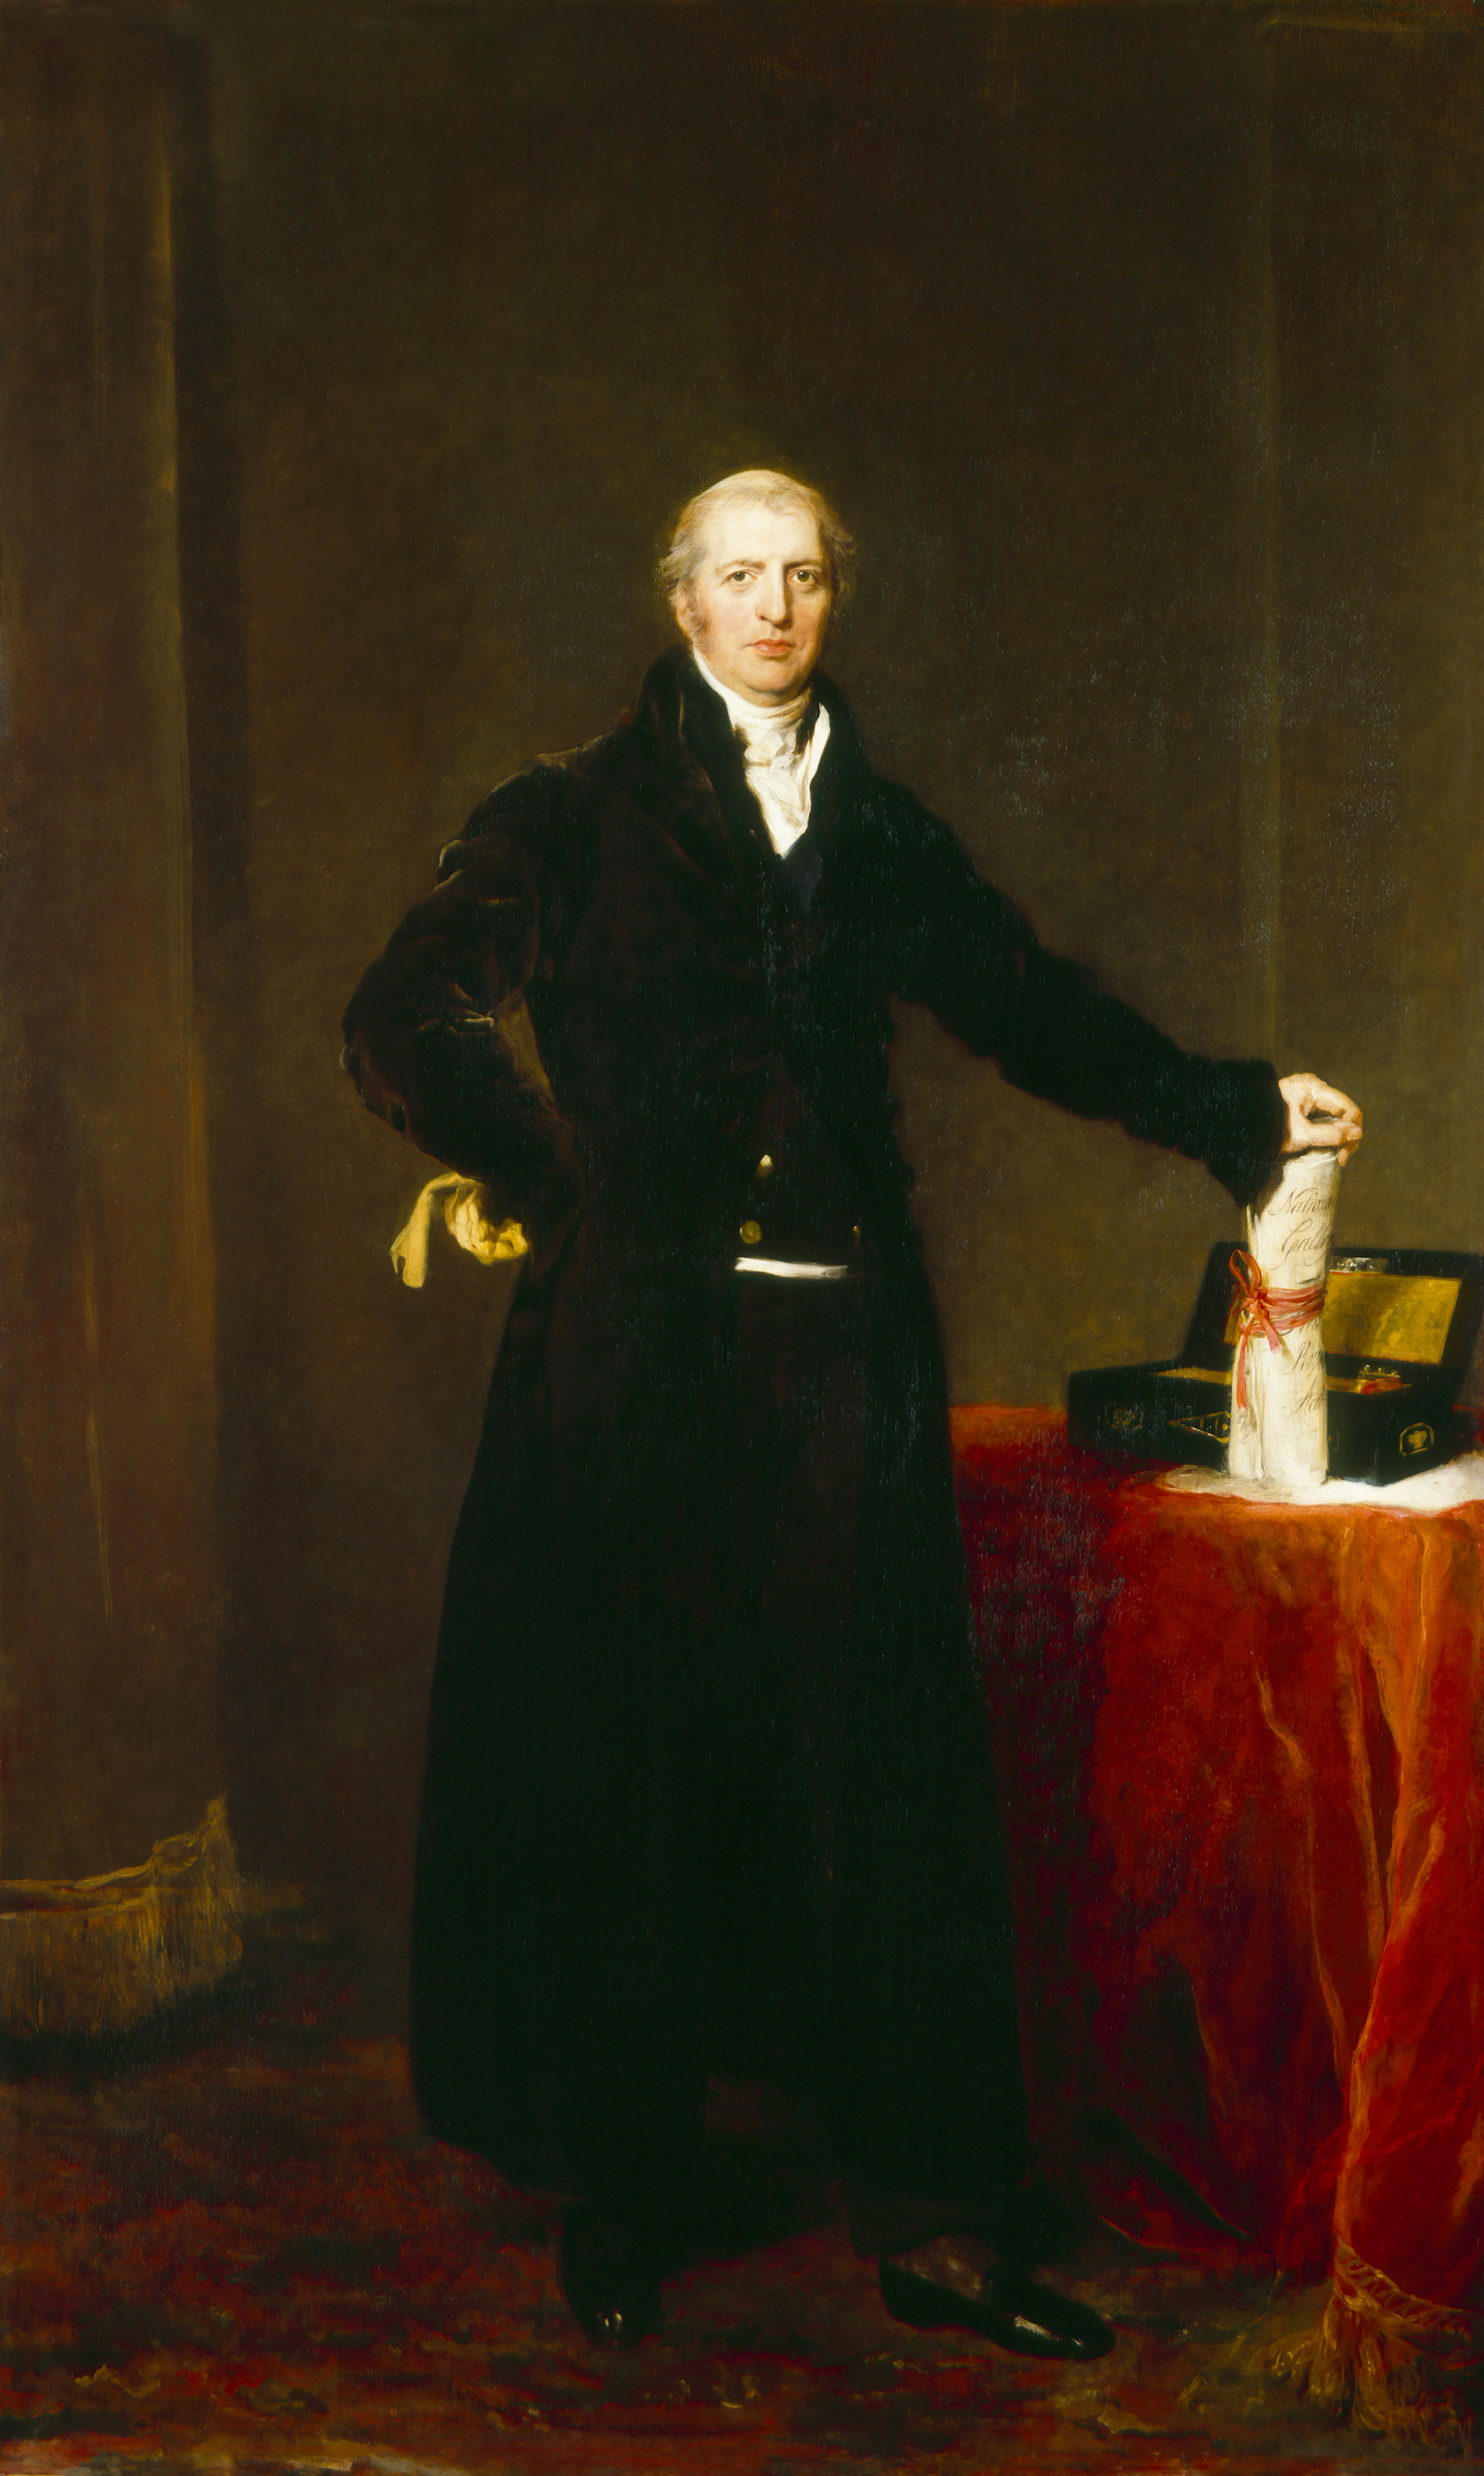 Robert_Jenkinson,_2nd_Earl_of_Liverpool_by_Sir_Thomas_Lawrence